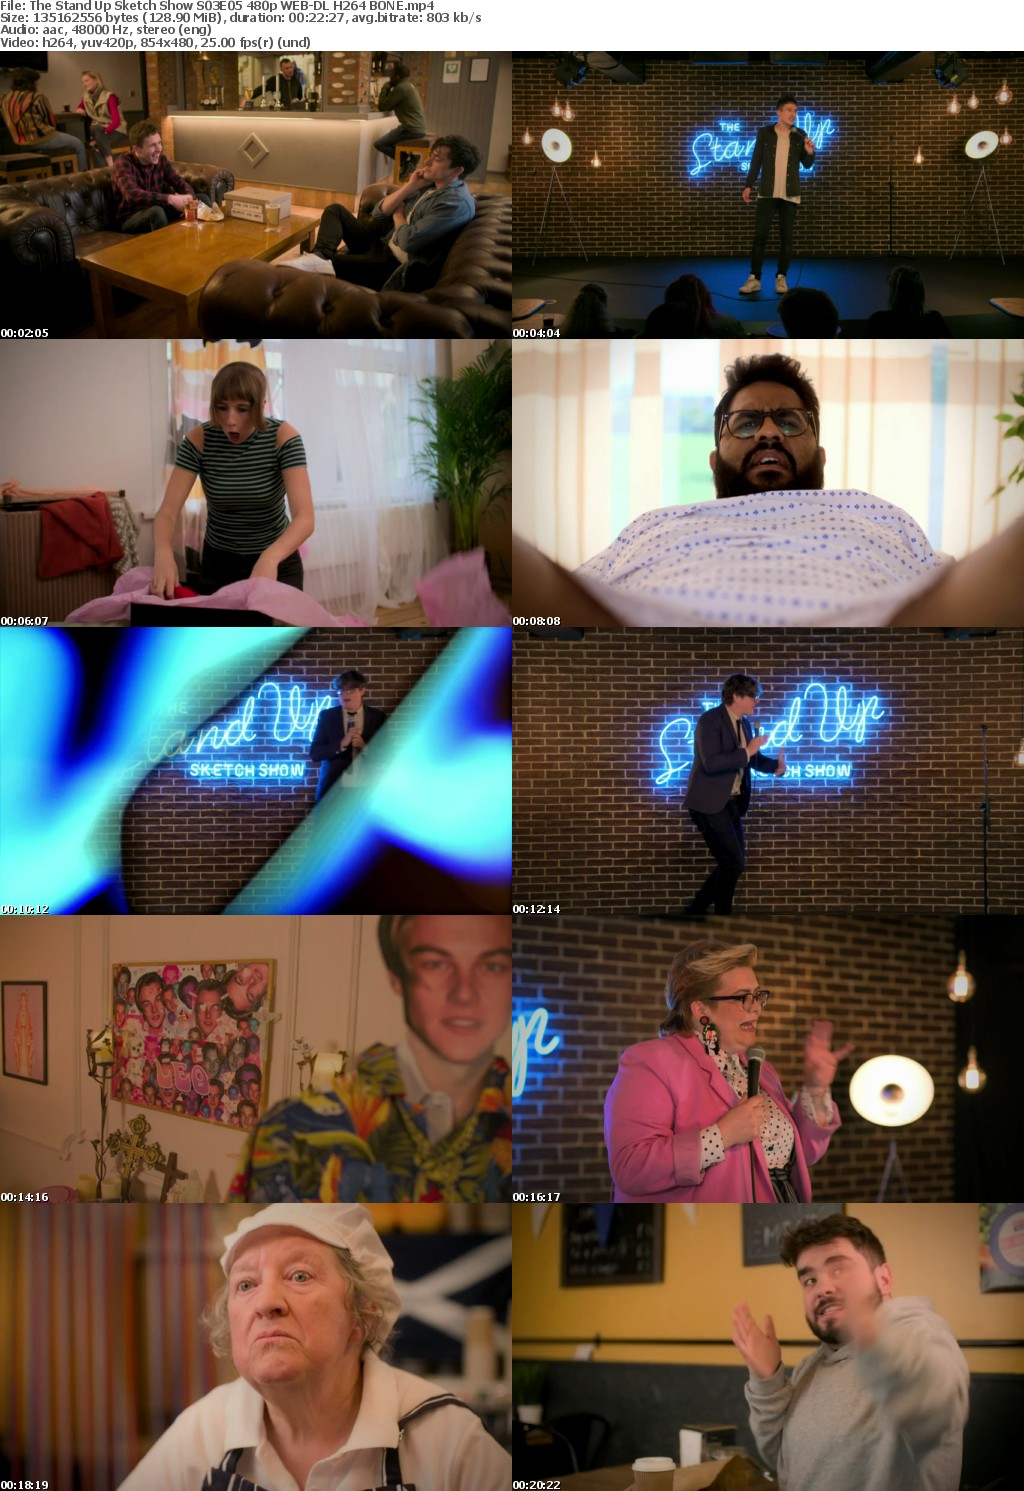 The Stand Up Sketch Show S01-S03 2019-2021 480p WEB-DL H264 BONE